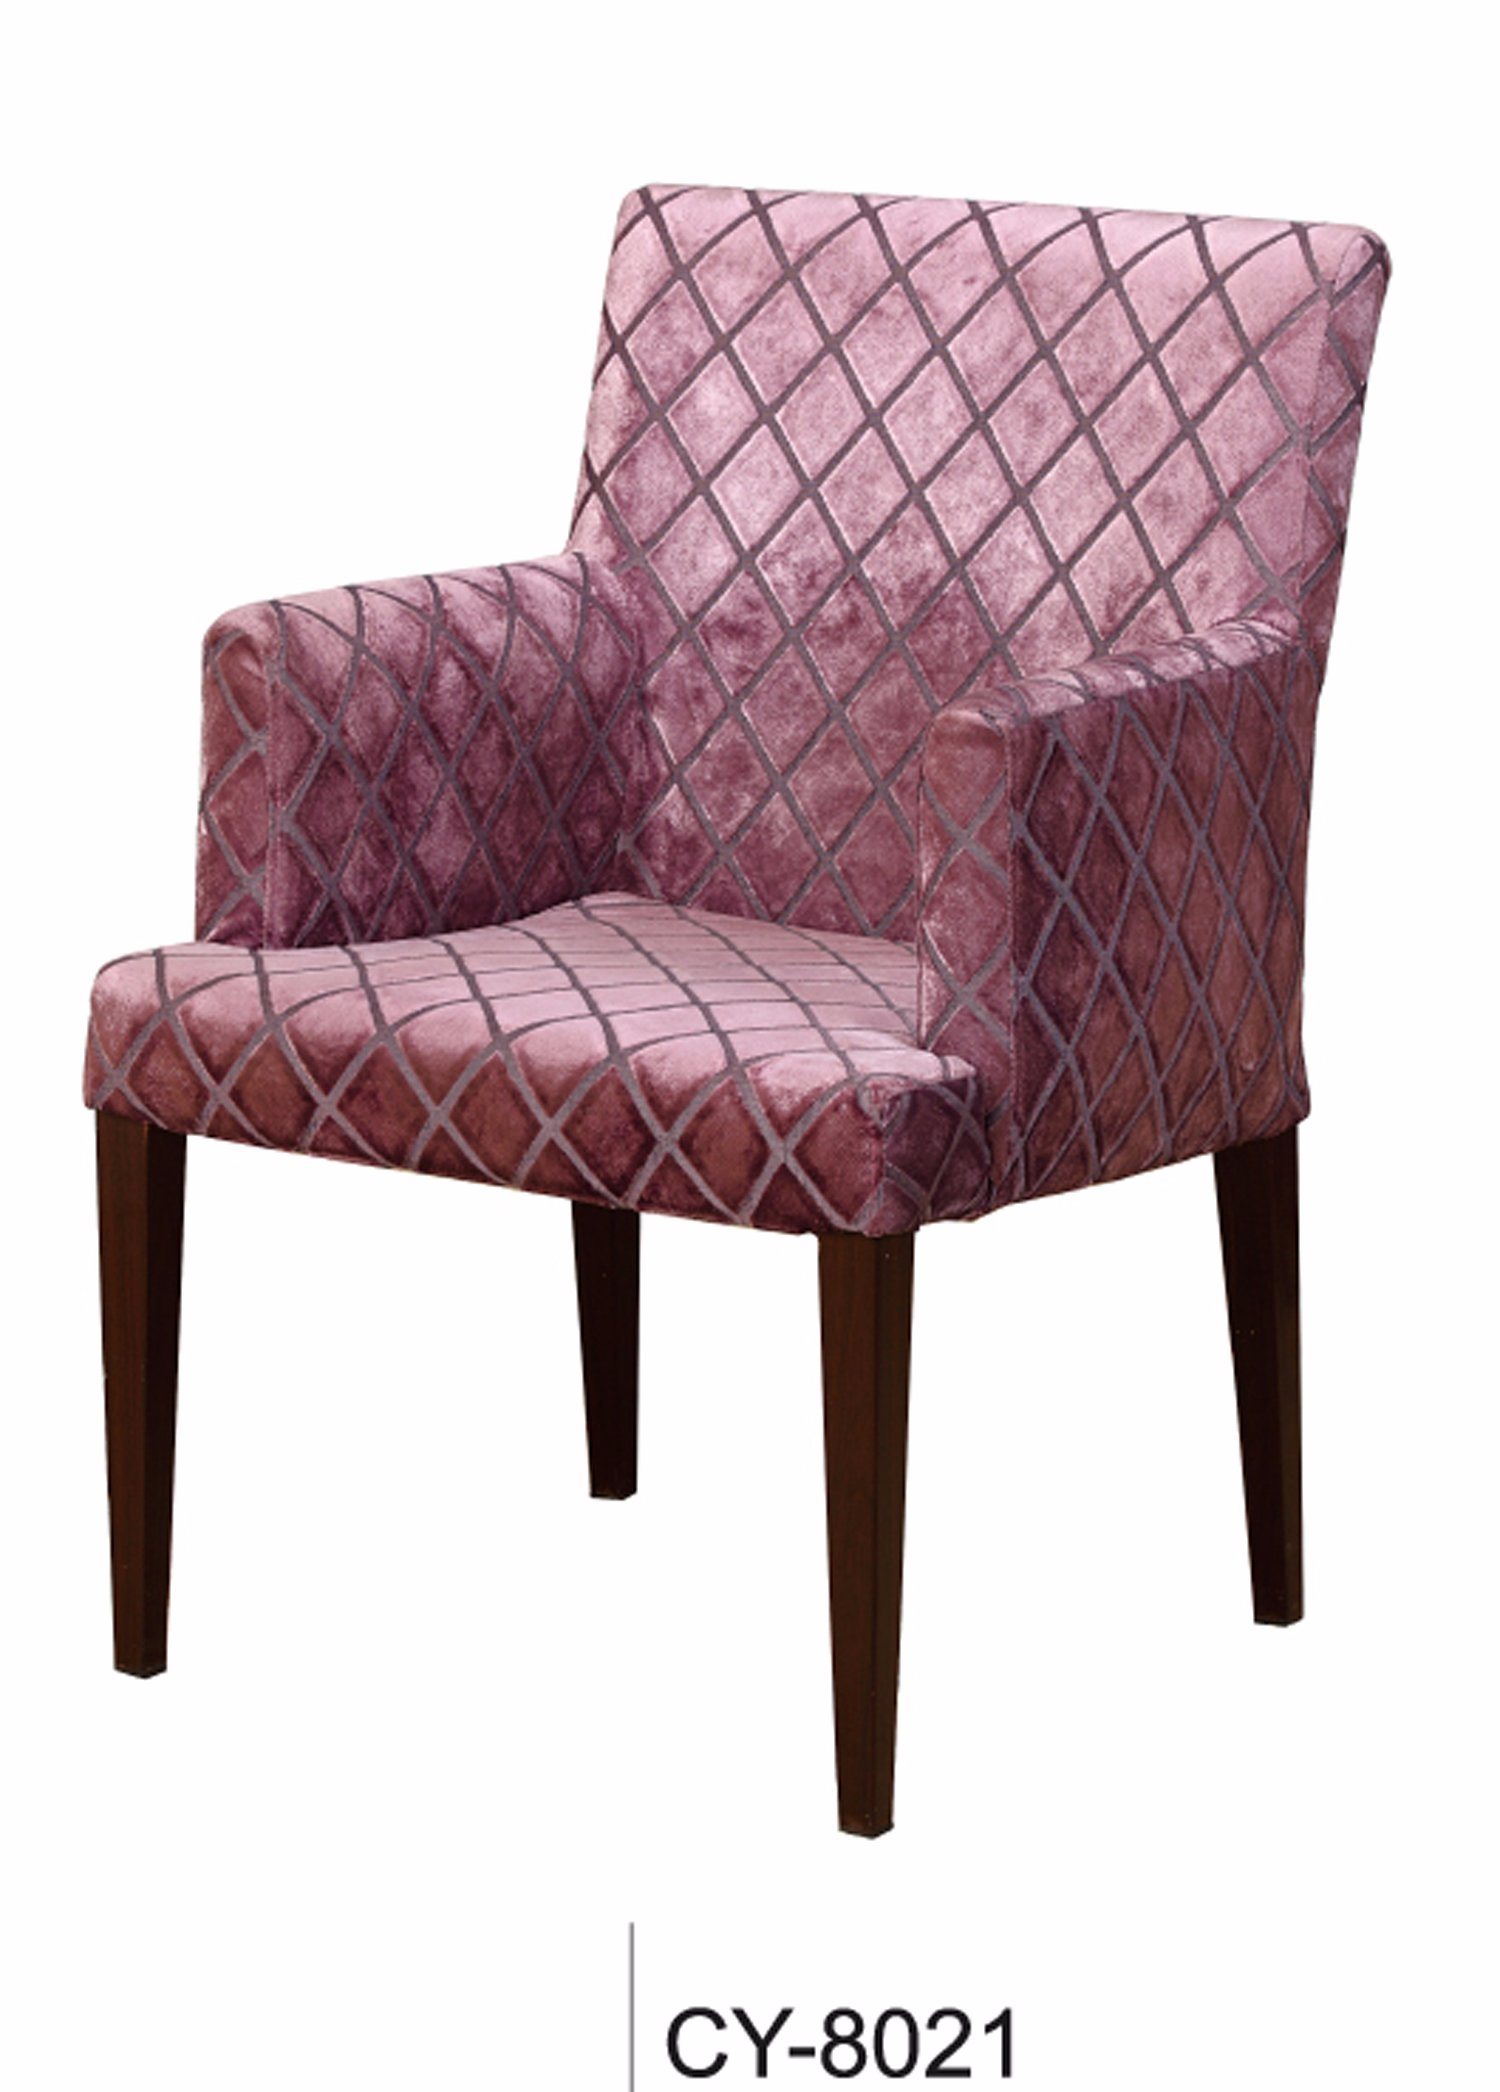 Elegant Wooden-Looking Hotel Dining Chair